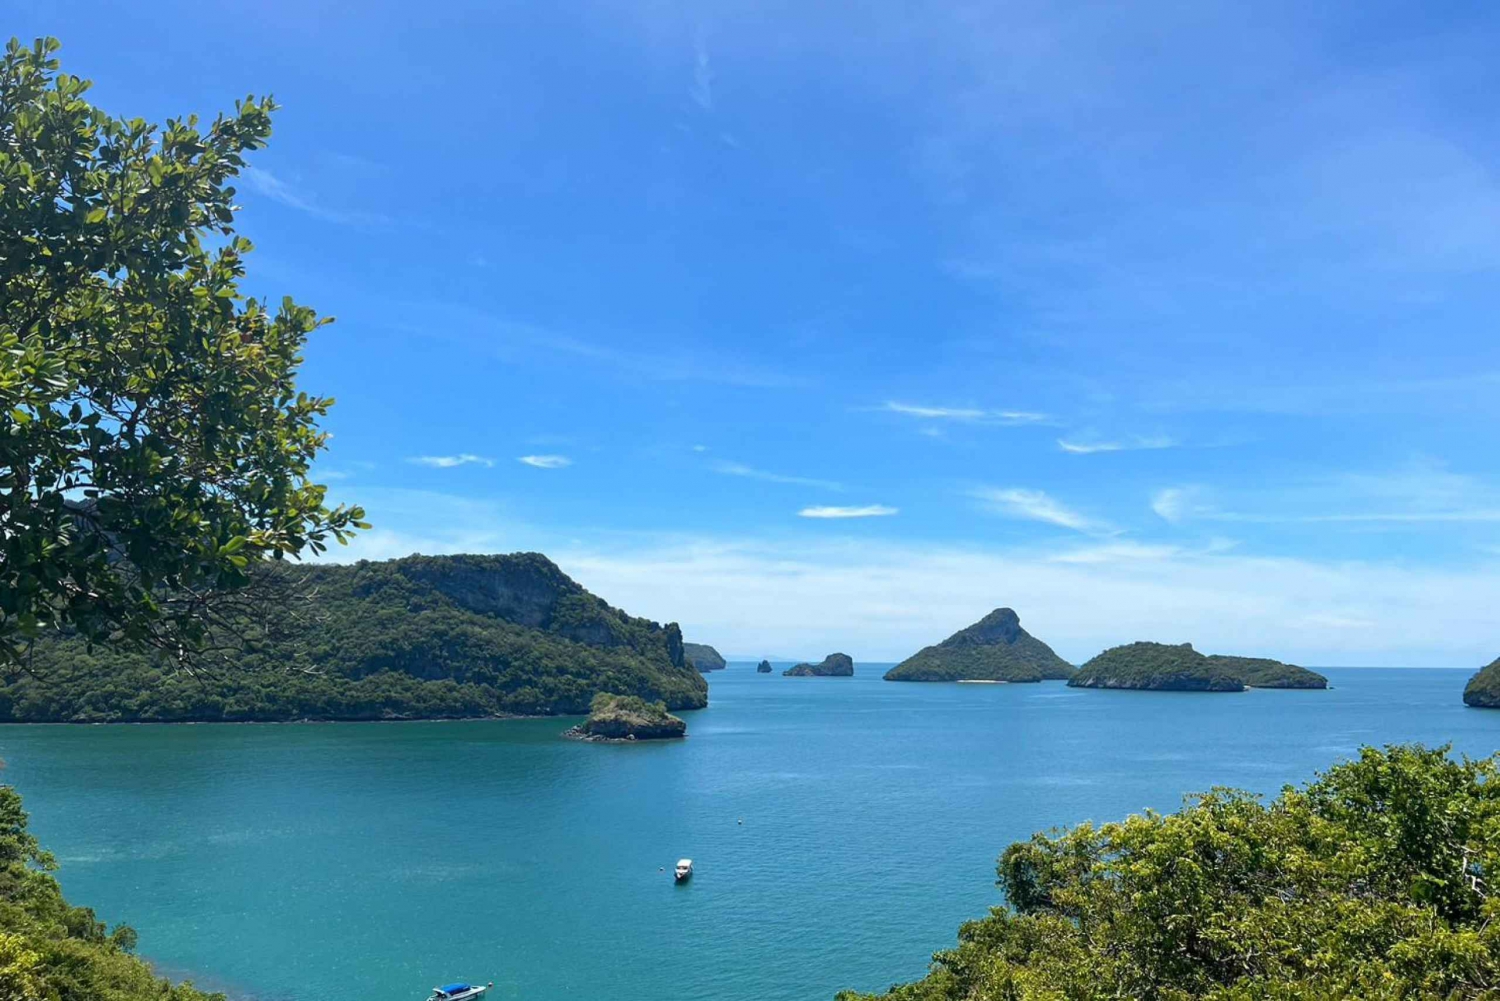 From Koh Samui: Private Ang Thong Marine Park Tour